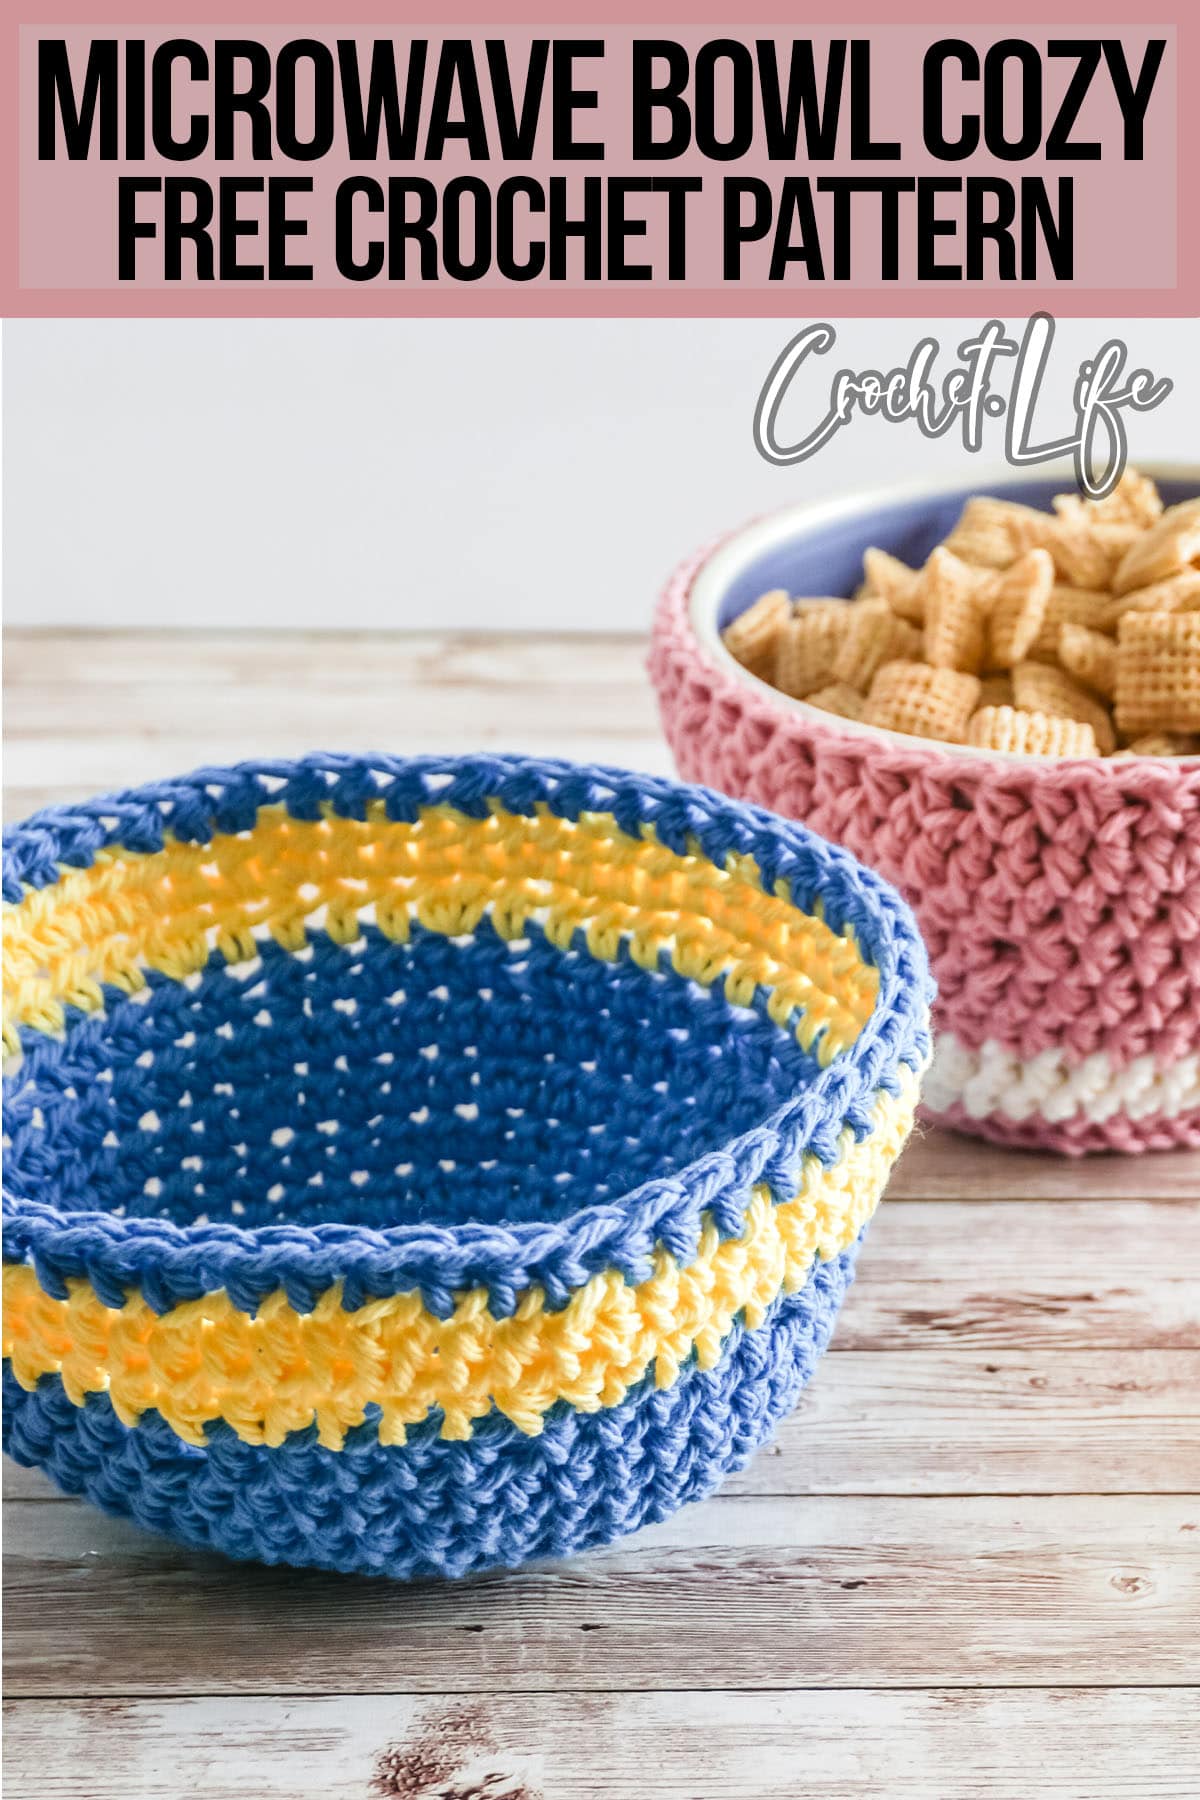 free pattern for crochet bowl cozy with text which reads microwave bowl cozy free crochet pattern